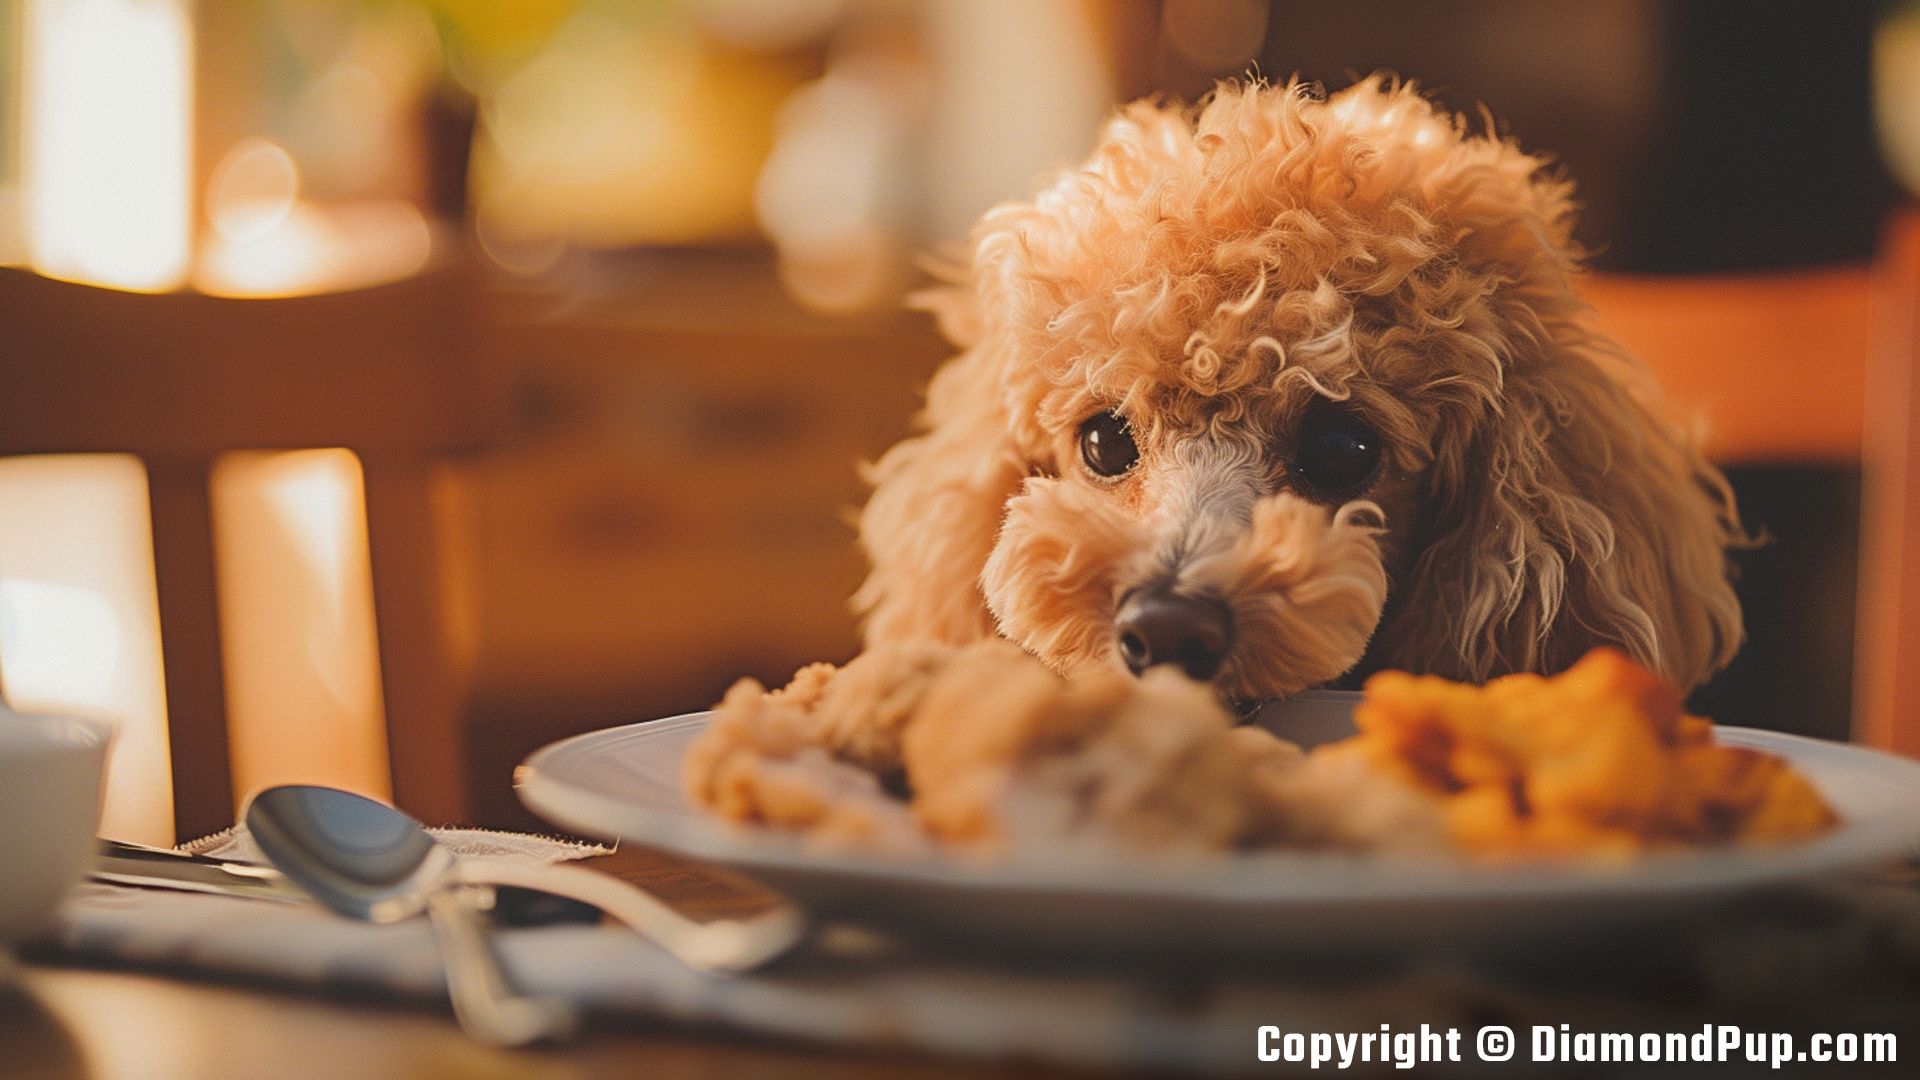 Image of a Playful Poodle Snacking on Chicken